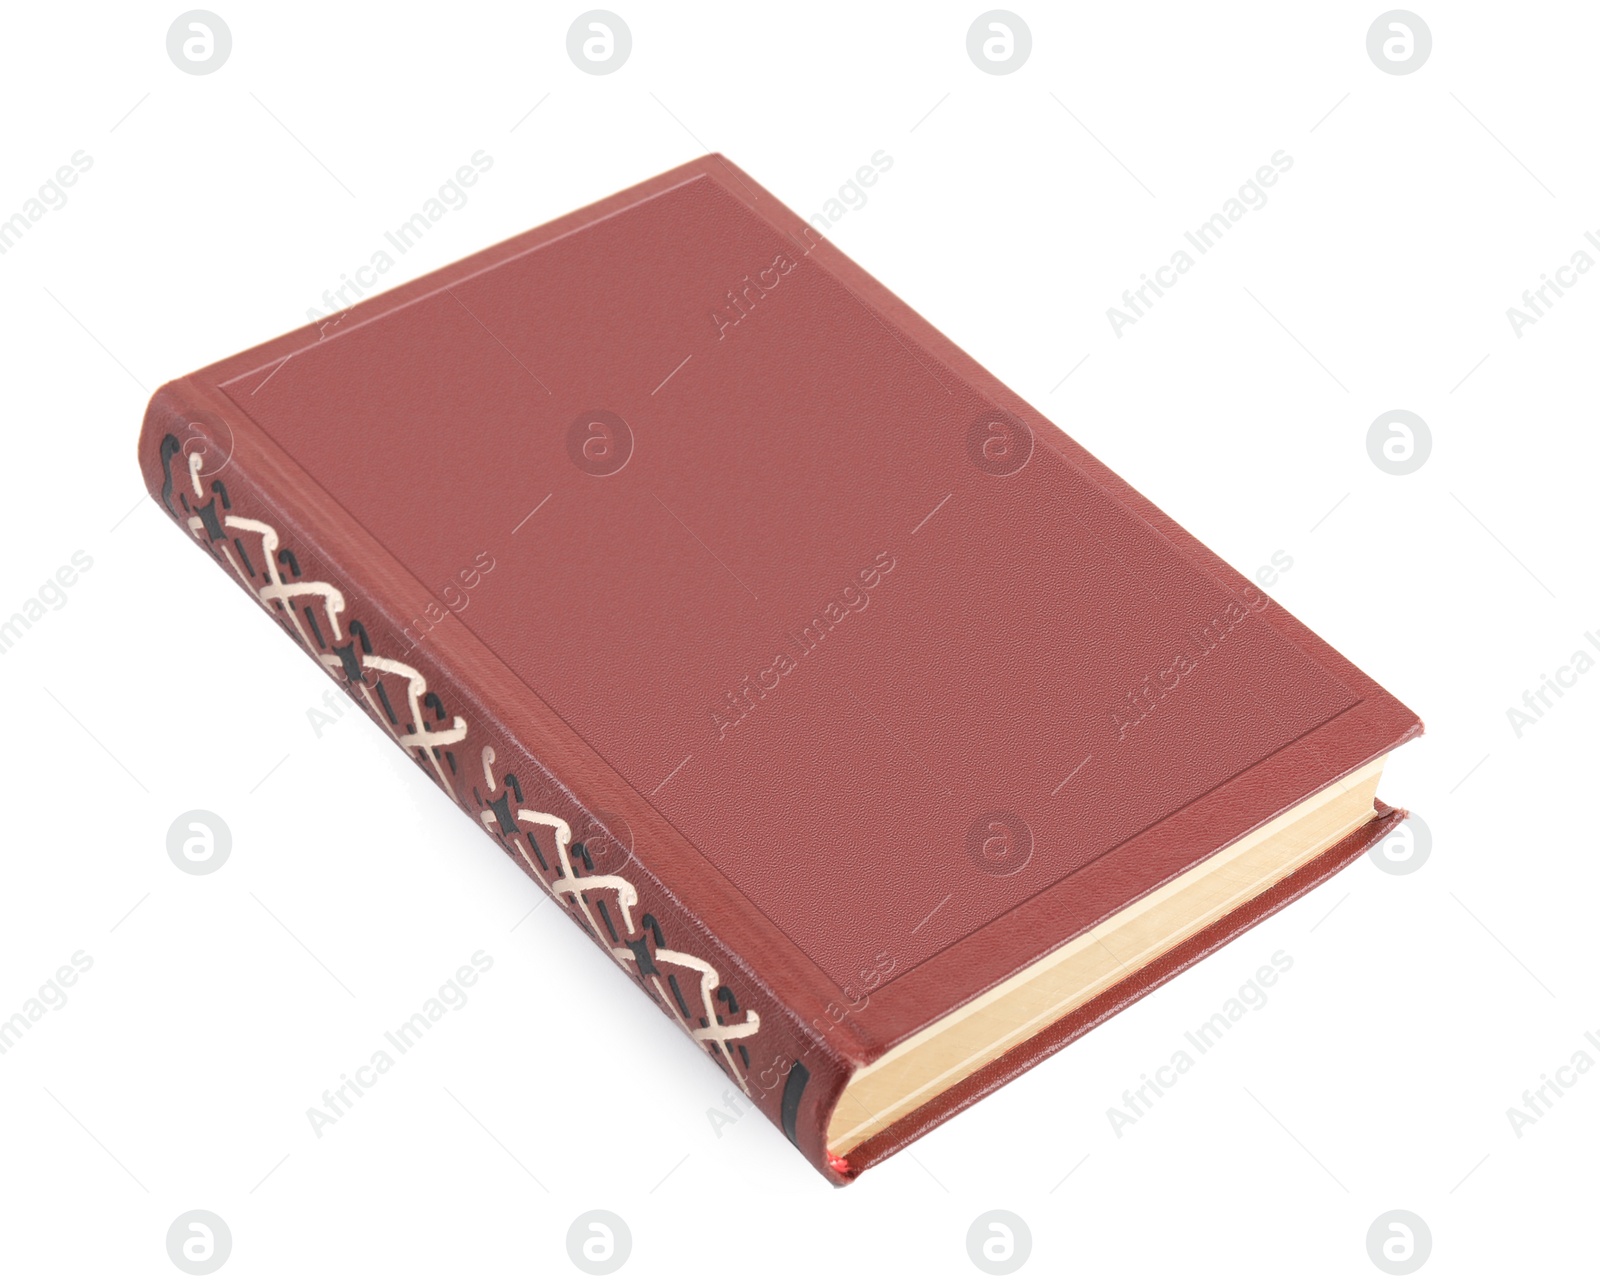 Photo of Book with hard cover isolated on white